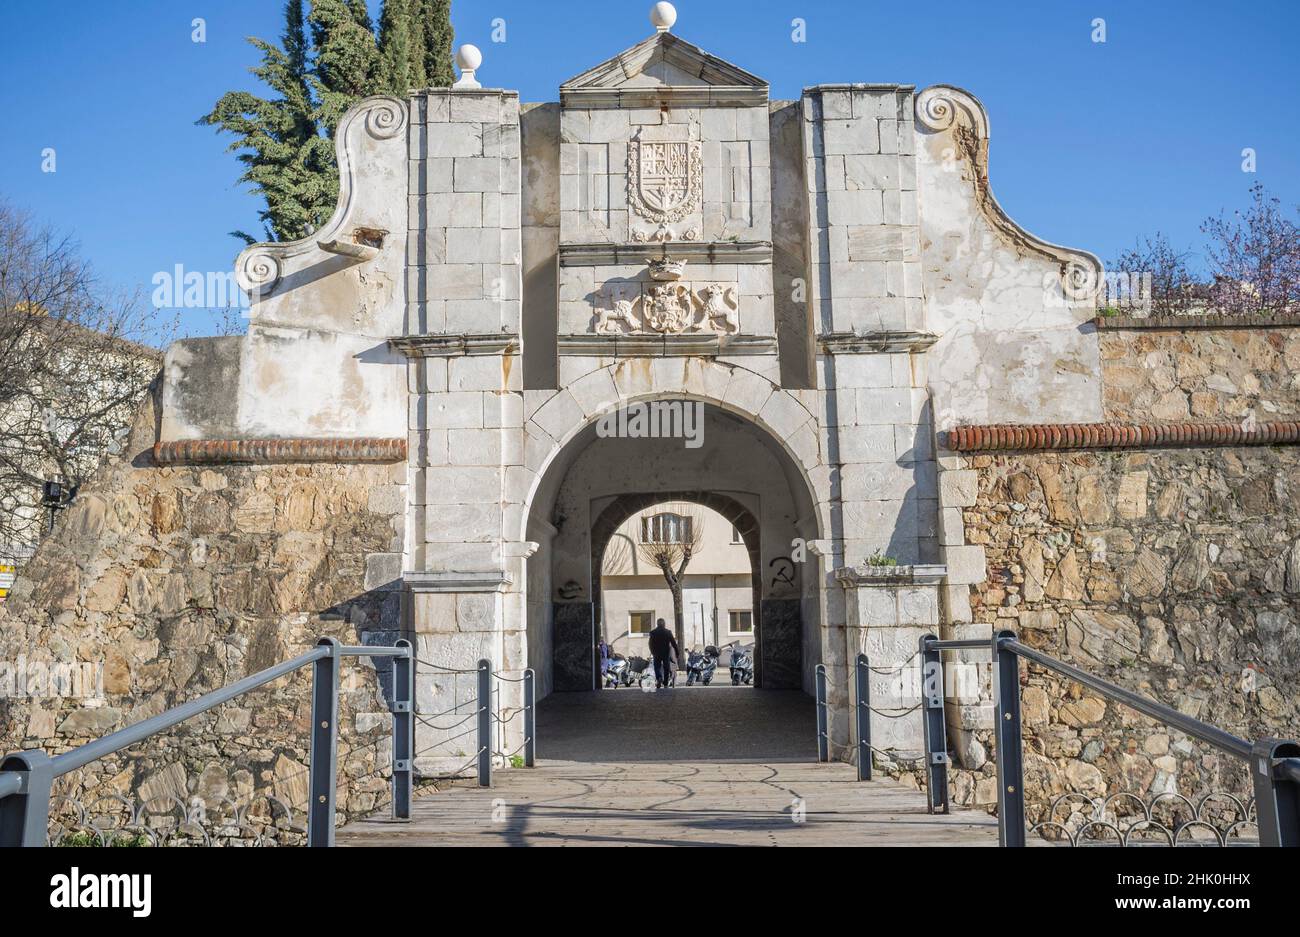 Pilar Gate or Puerta Pilar, Badajoz, Extremadura, Spain. Entrances to the bastioned fortification built in 17th century. Stock Photo